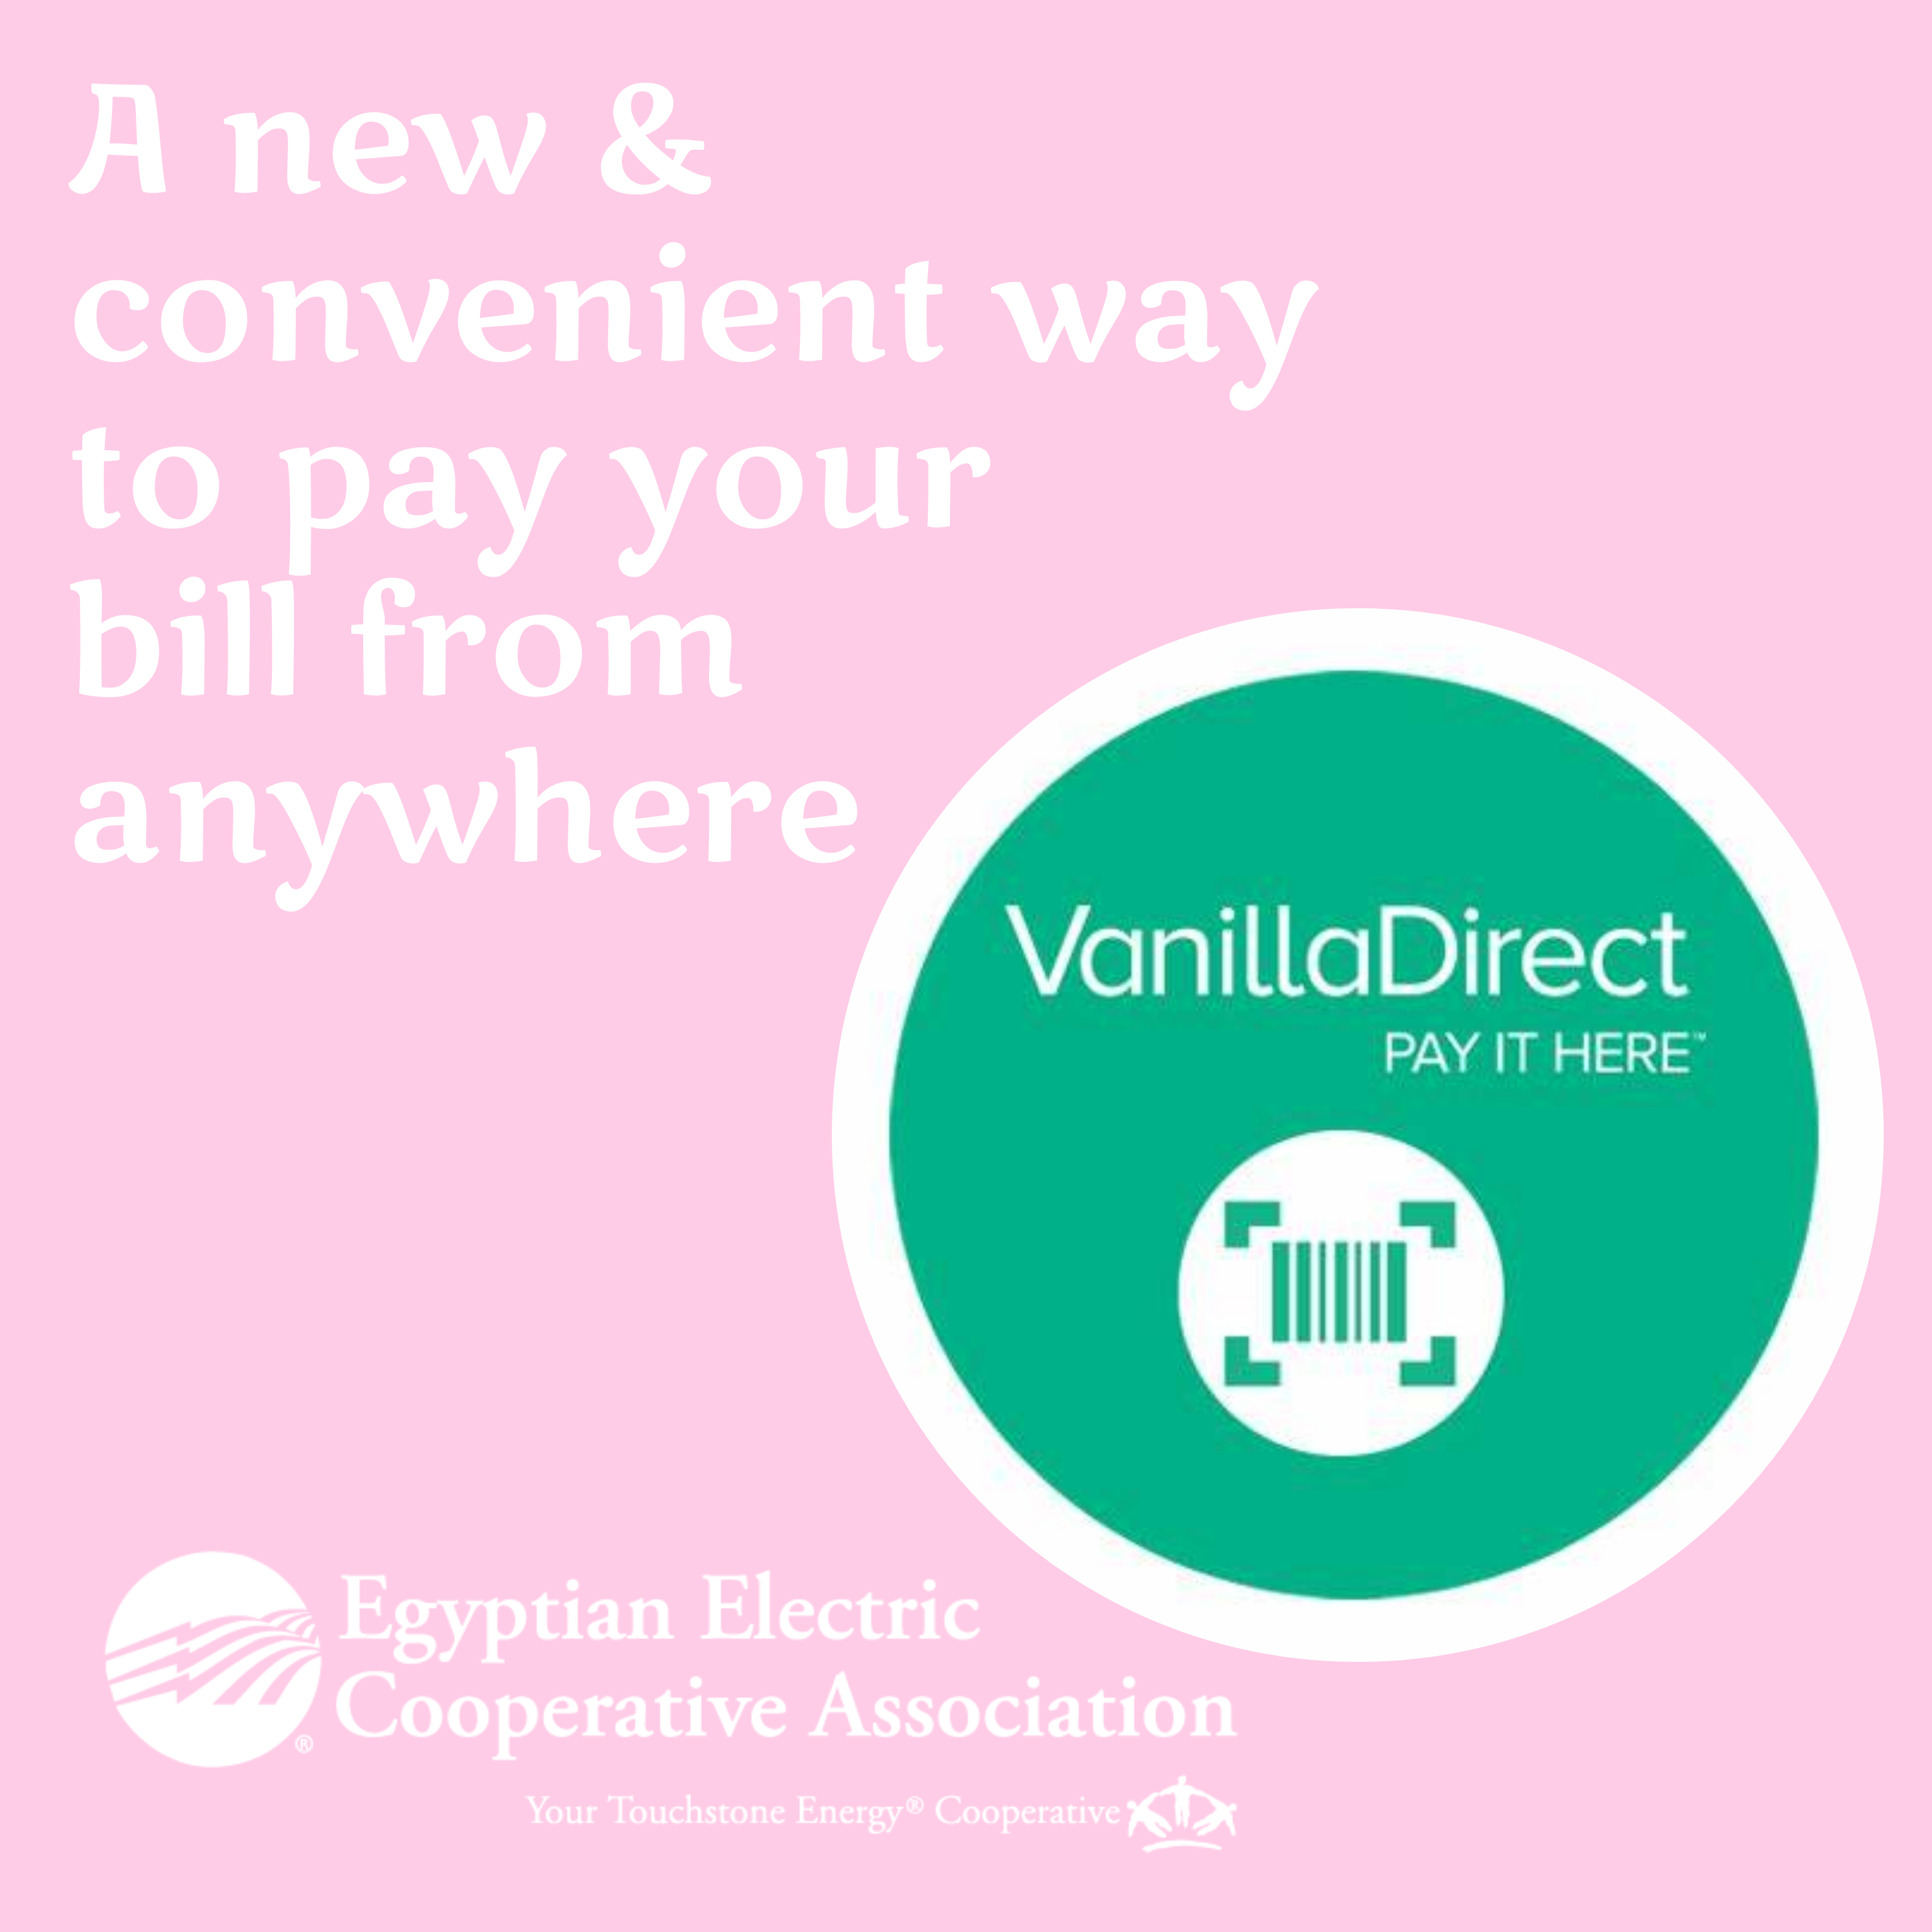 A new and convenient way to pay your bill from anywhere - vanilla direct